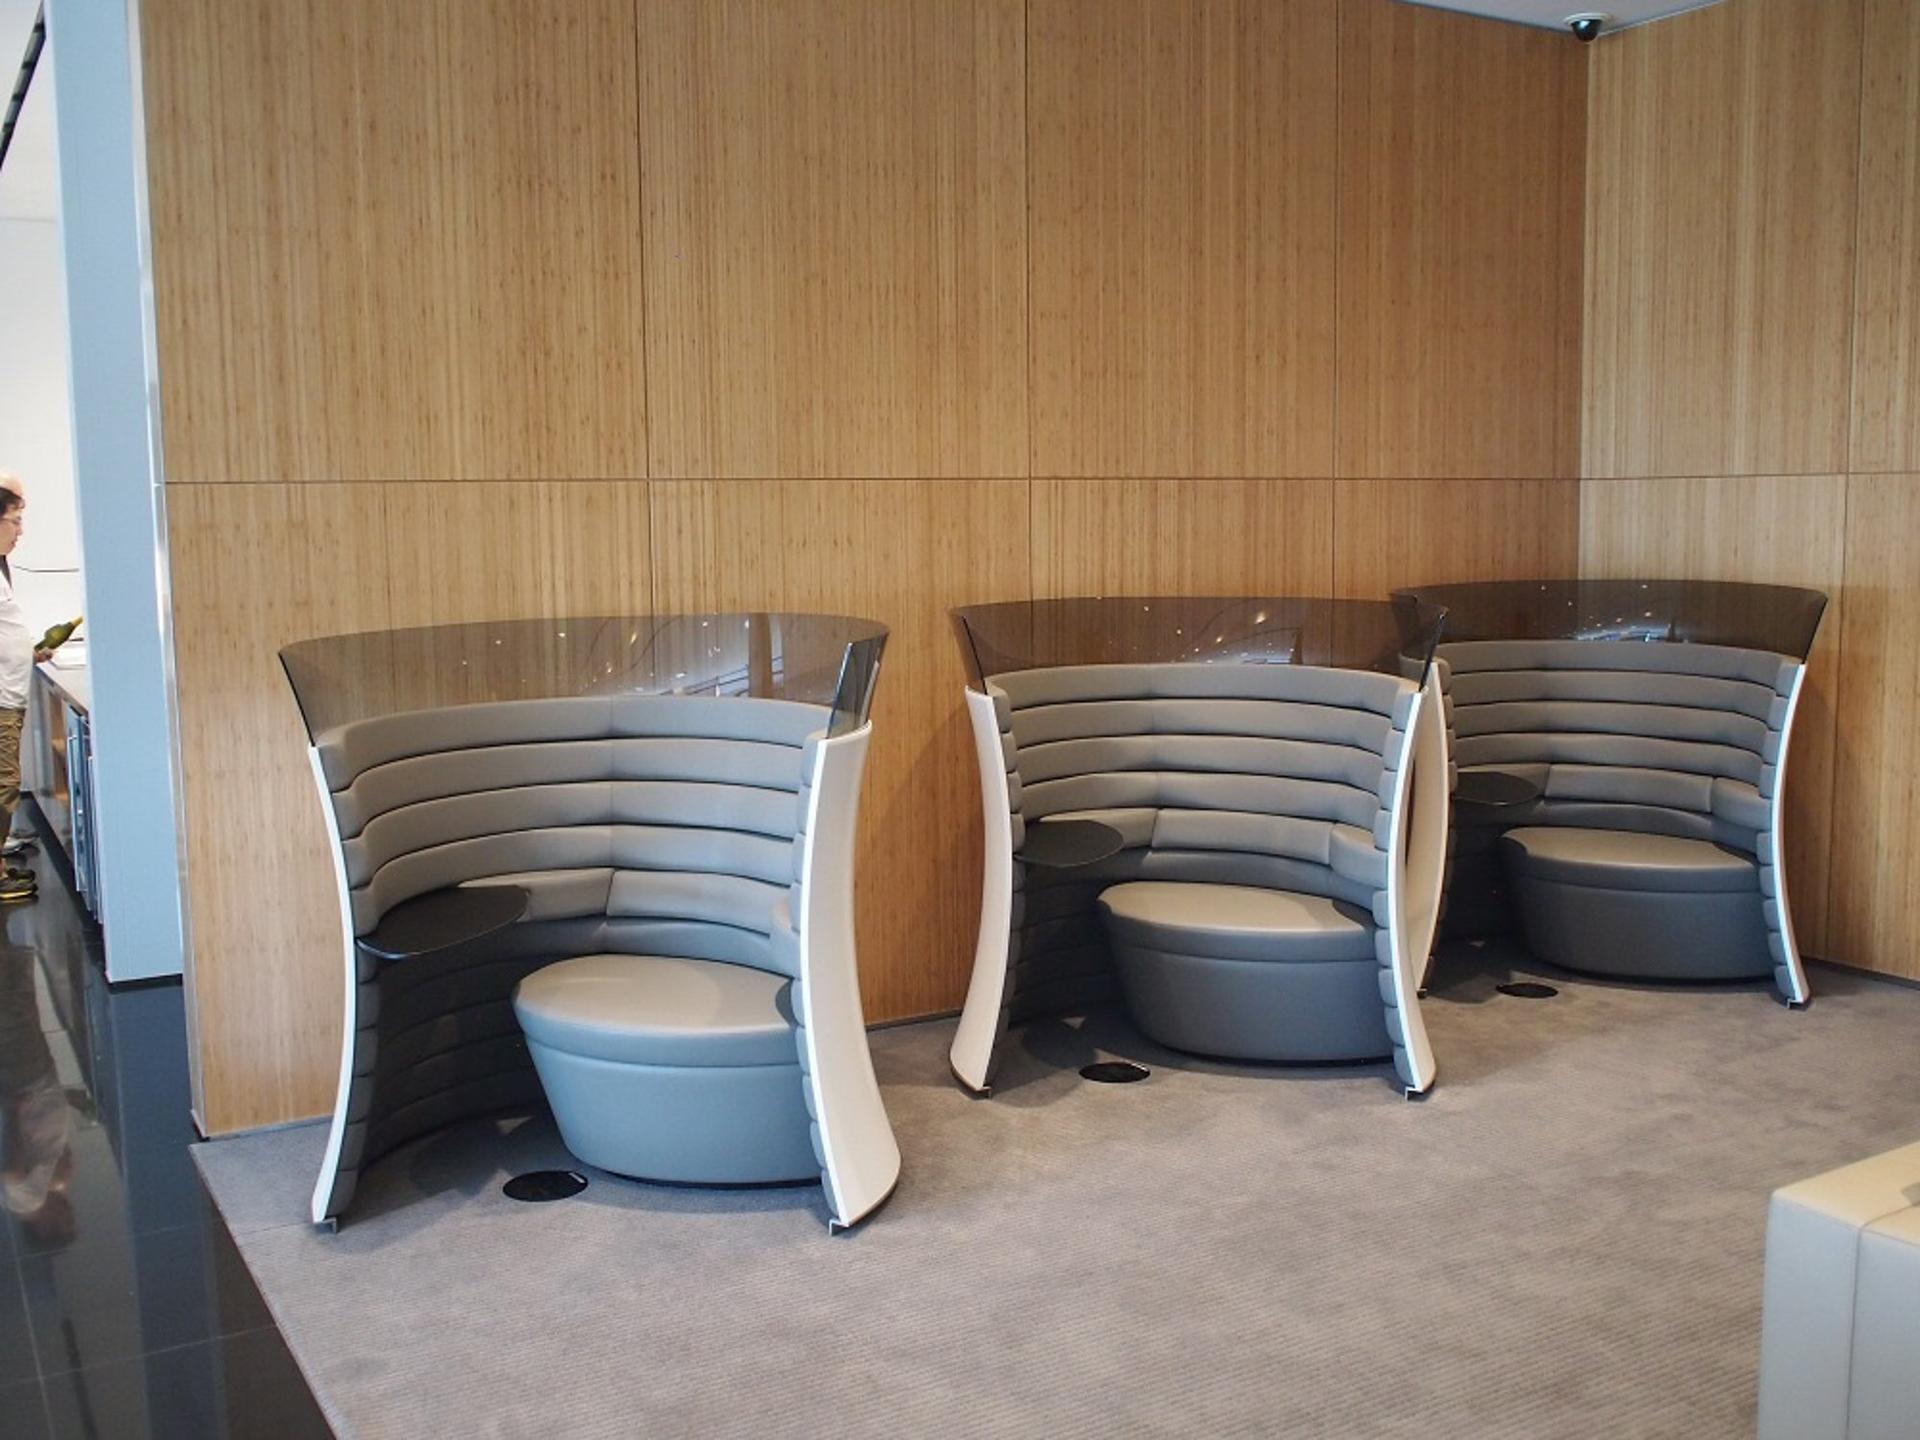 Cathay Pacific First and Business Class Lounge image 31 of 74